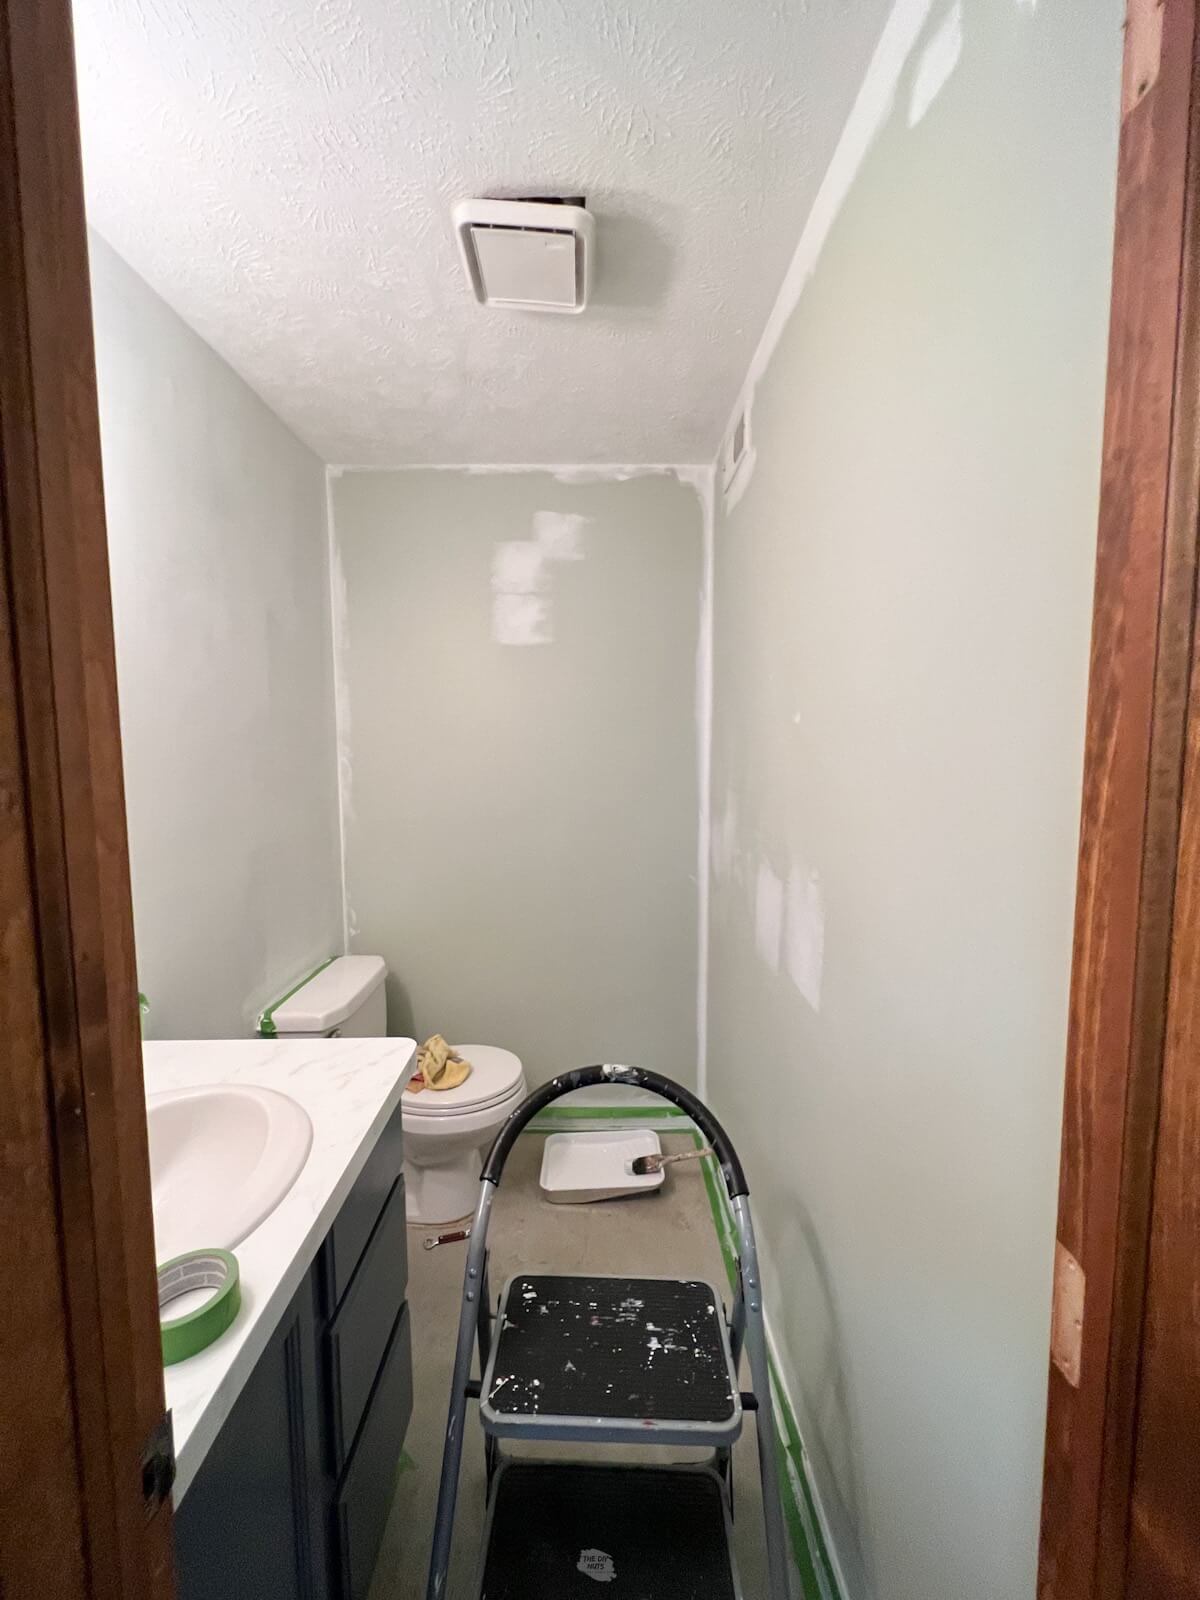 small bathroom with white paint on some parts of the walls.